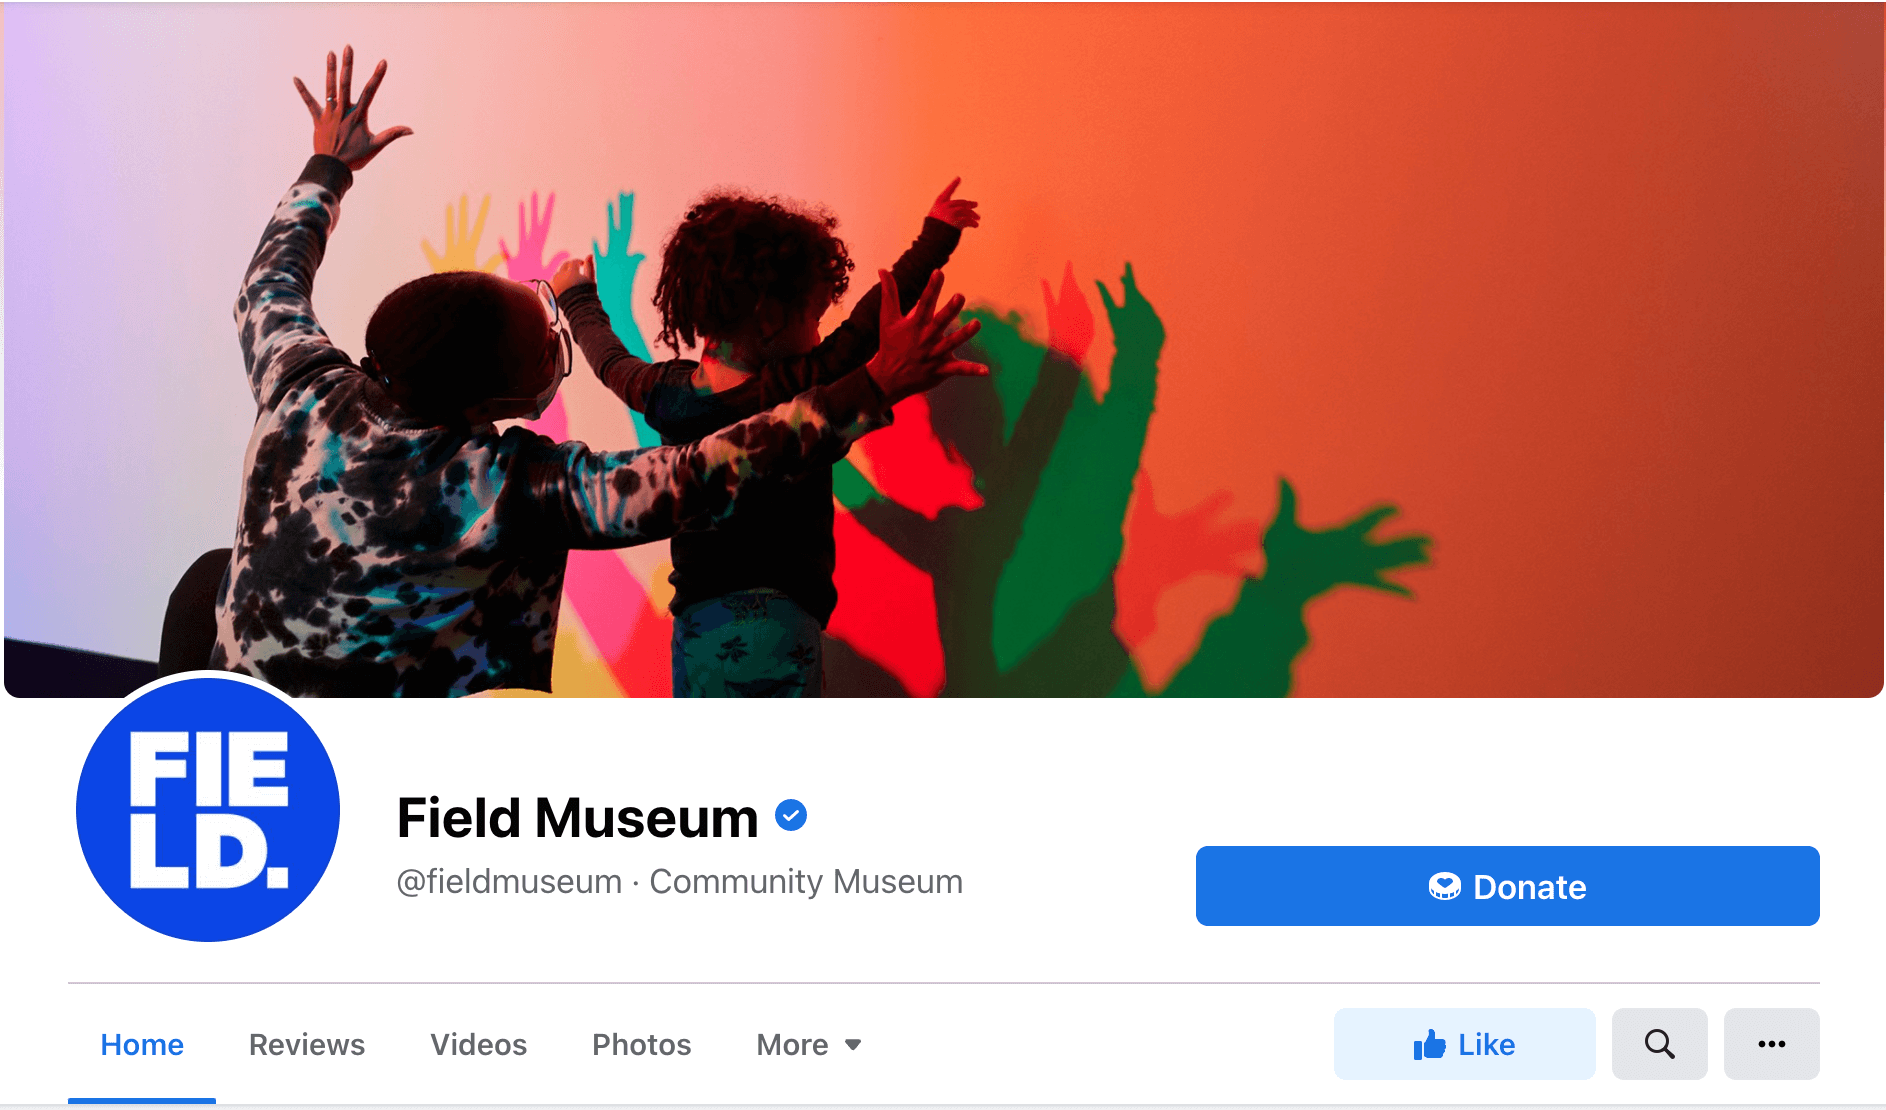 The Field Museum's page header